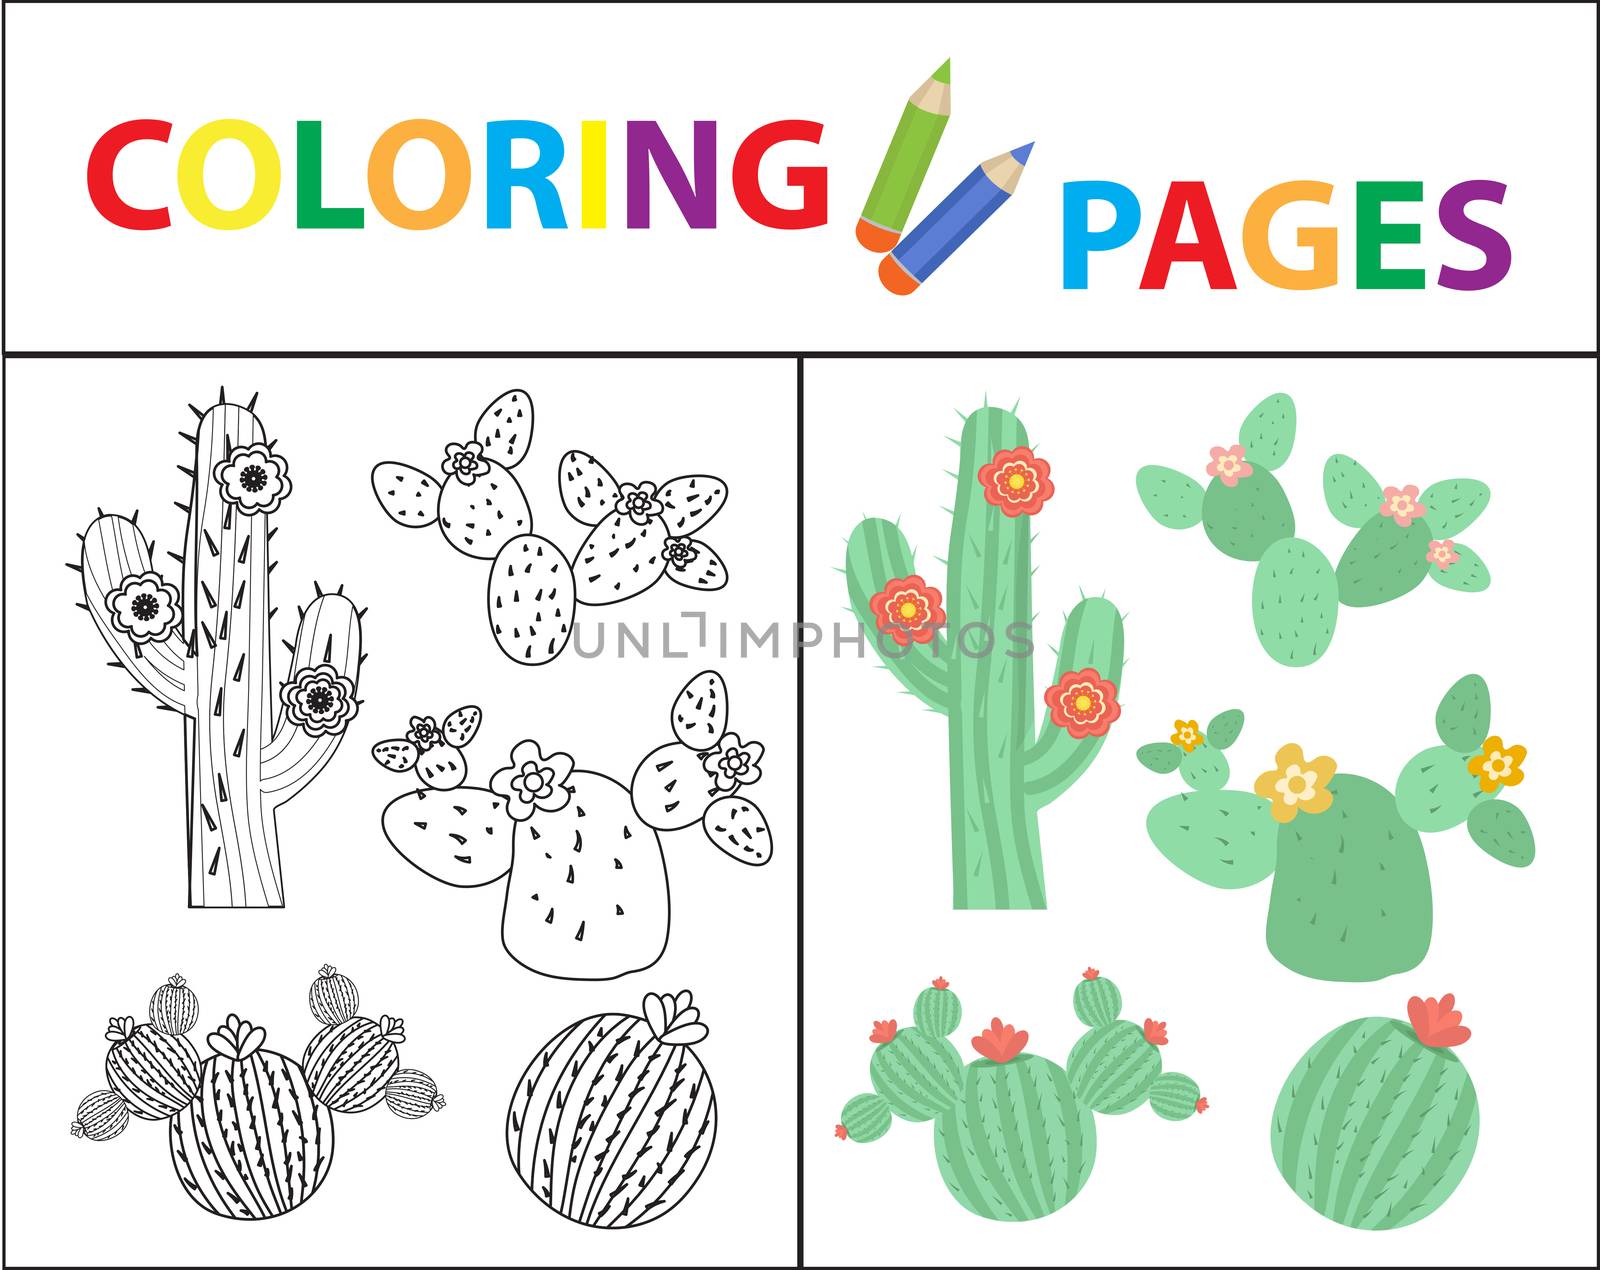 Coloring book page for kids. Set of cactus. Sketch outline and color version. Childrens education. illustration